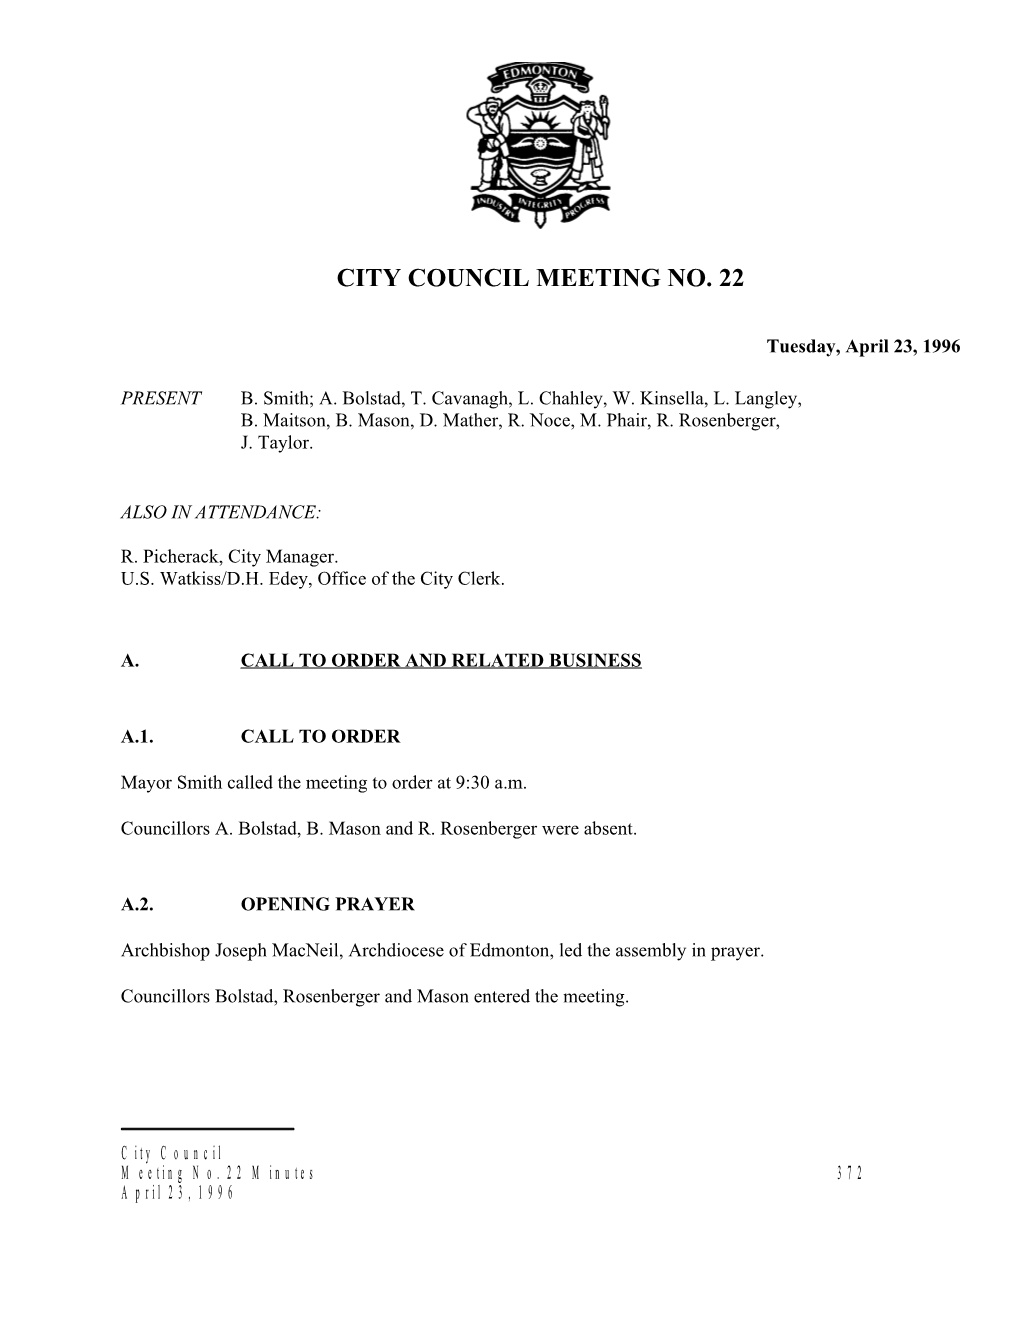 Minutes for City Council April 23, 1996 Meeting